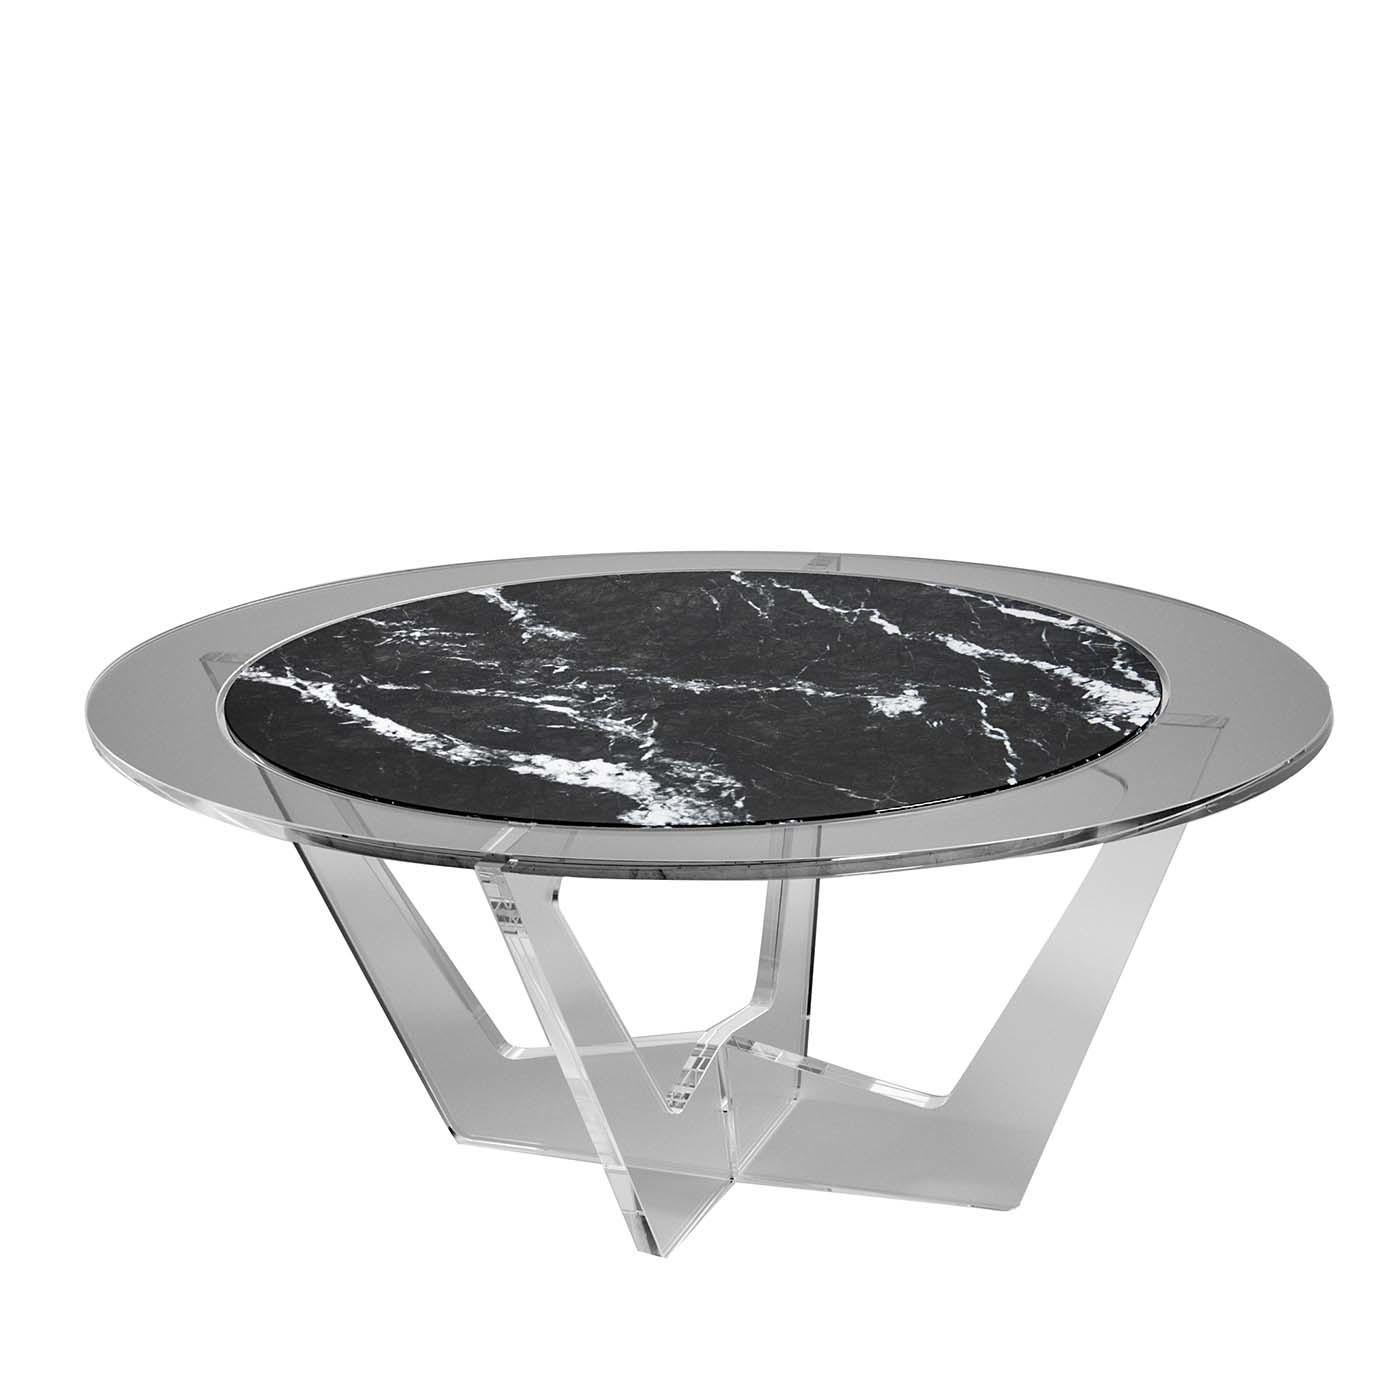 The essential lines of this modern table embody the perfect balance between the lightness and transparency of the methacrylate and the stern austerity of the marble. Seemingly afloat a smoke-gray acrylic glass ring, the oval Carnico marble top